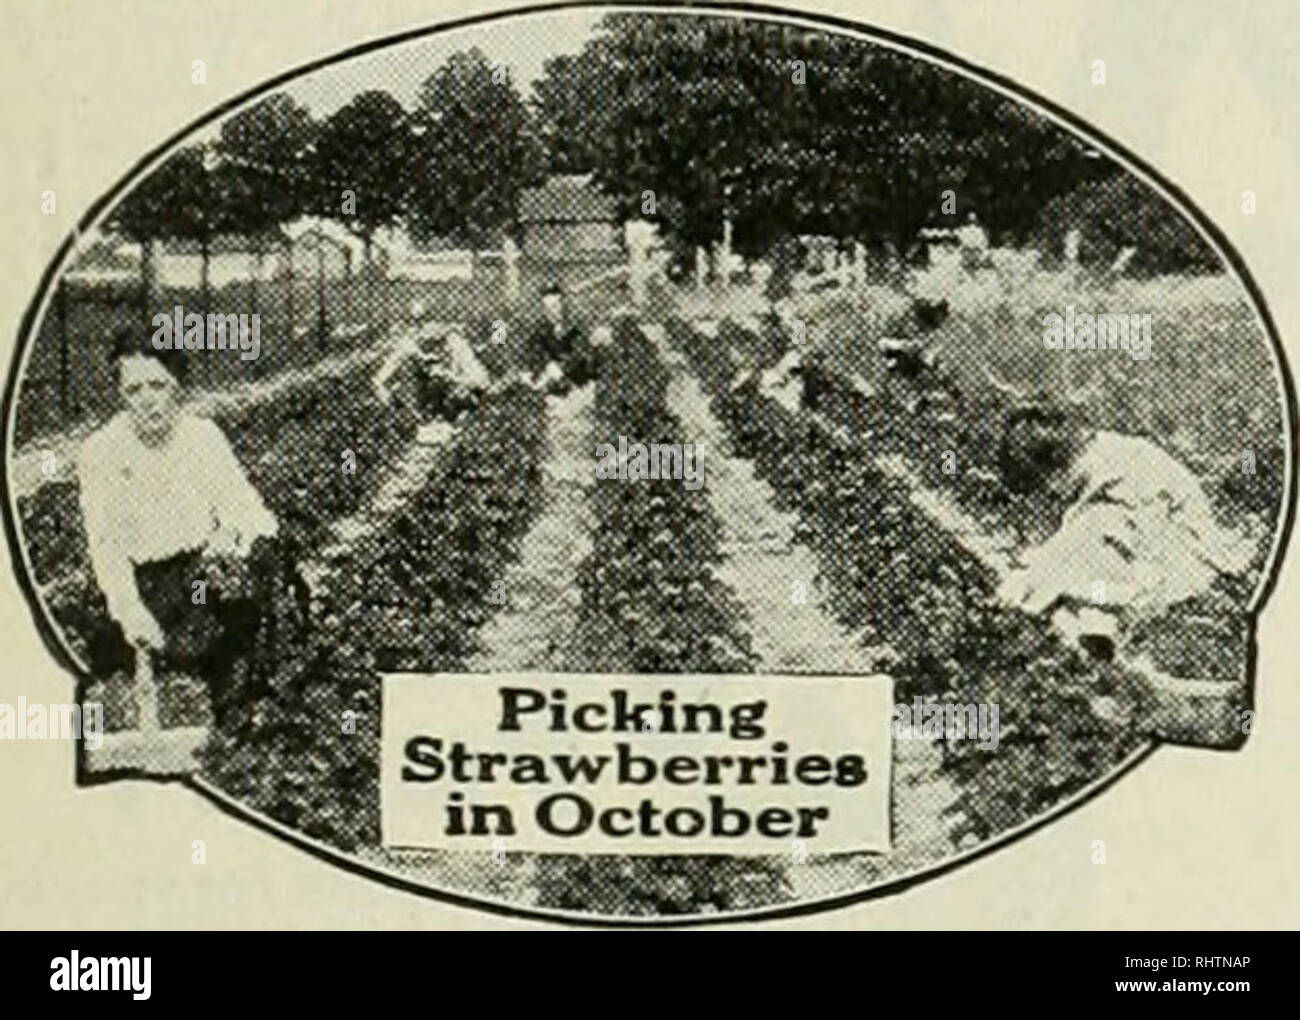 . Better fruit. Fruit-culture. 79/; &quot;Great Crops of (Strawberries;  and How To Grow Them&quot; Lj ^L is the best and most complete book on ^k Strawberry GrowinR ever written. It fully ex- « plains the KELLOGG WAY of Rowing two V biR crops each year—a big profit in the Spring . I and a bigger profit in the Fall. Tells e%erv- m m thinK about strawberry growing from start to M # finish. Write for thia book and learn how to Q^^r supply your family with delicious strawberries the year 'round without cost, and how to mako S5Q0 to $1200 per acre each year. The book is i'^RKE.. Strawberries grro Stock Photo